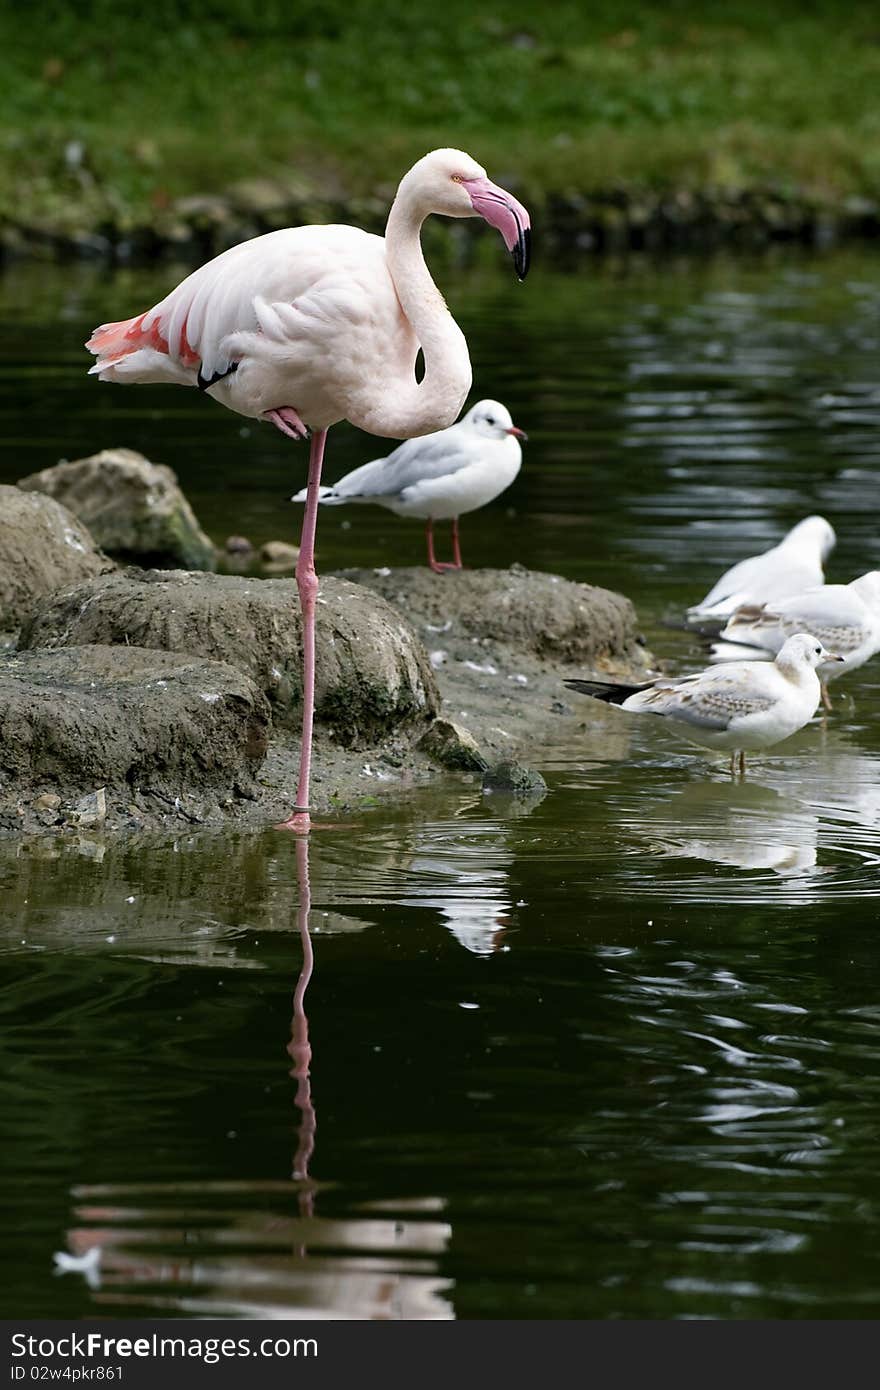 A pink flamingo in a lake in between birds